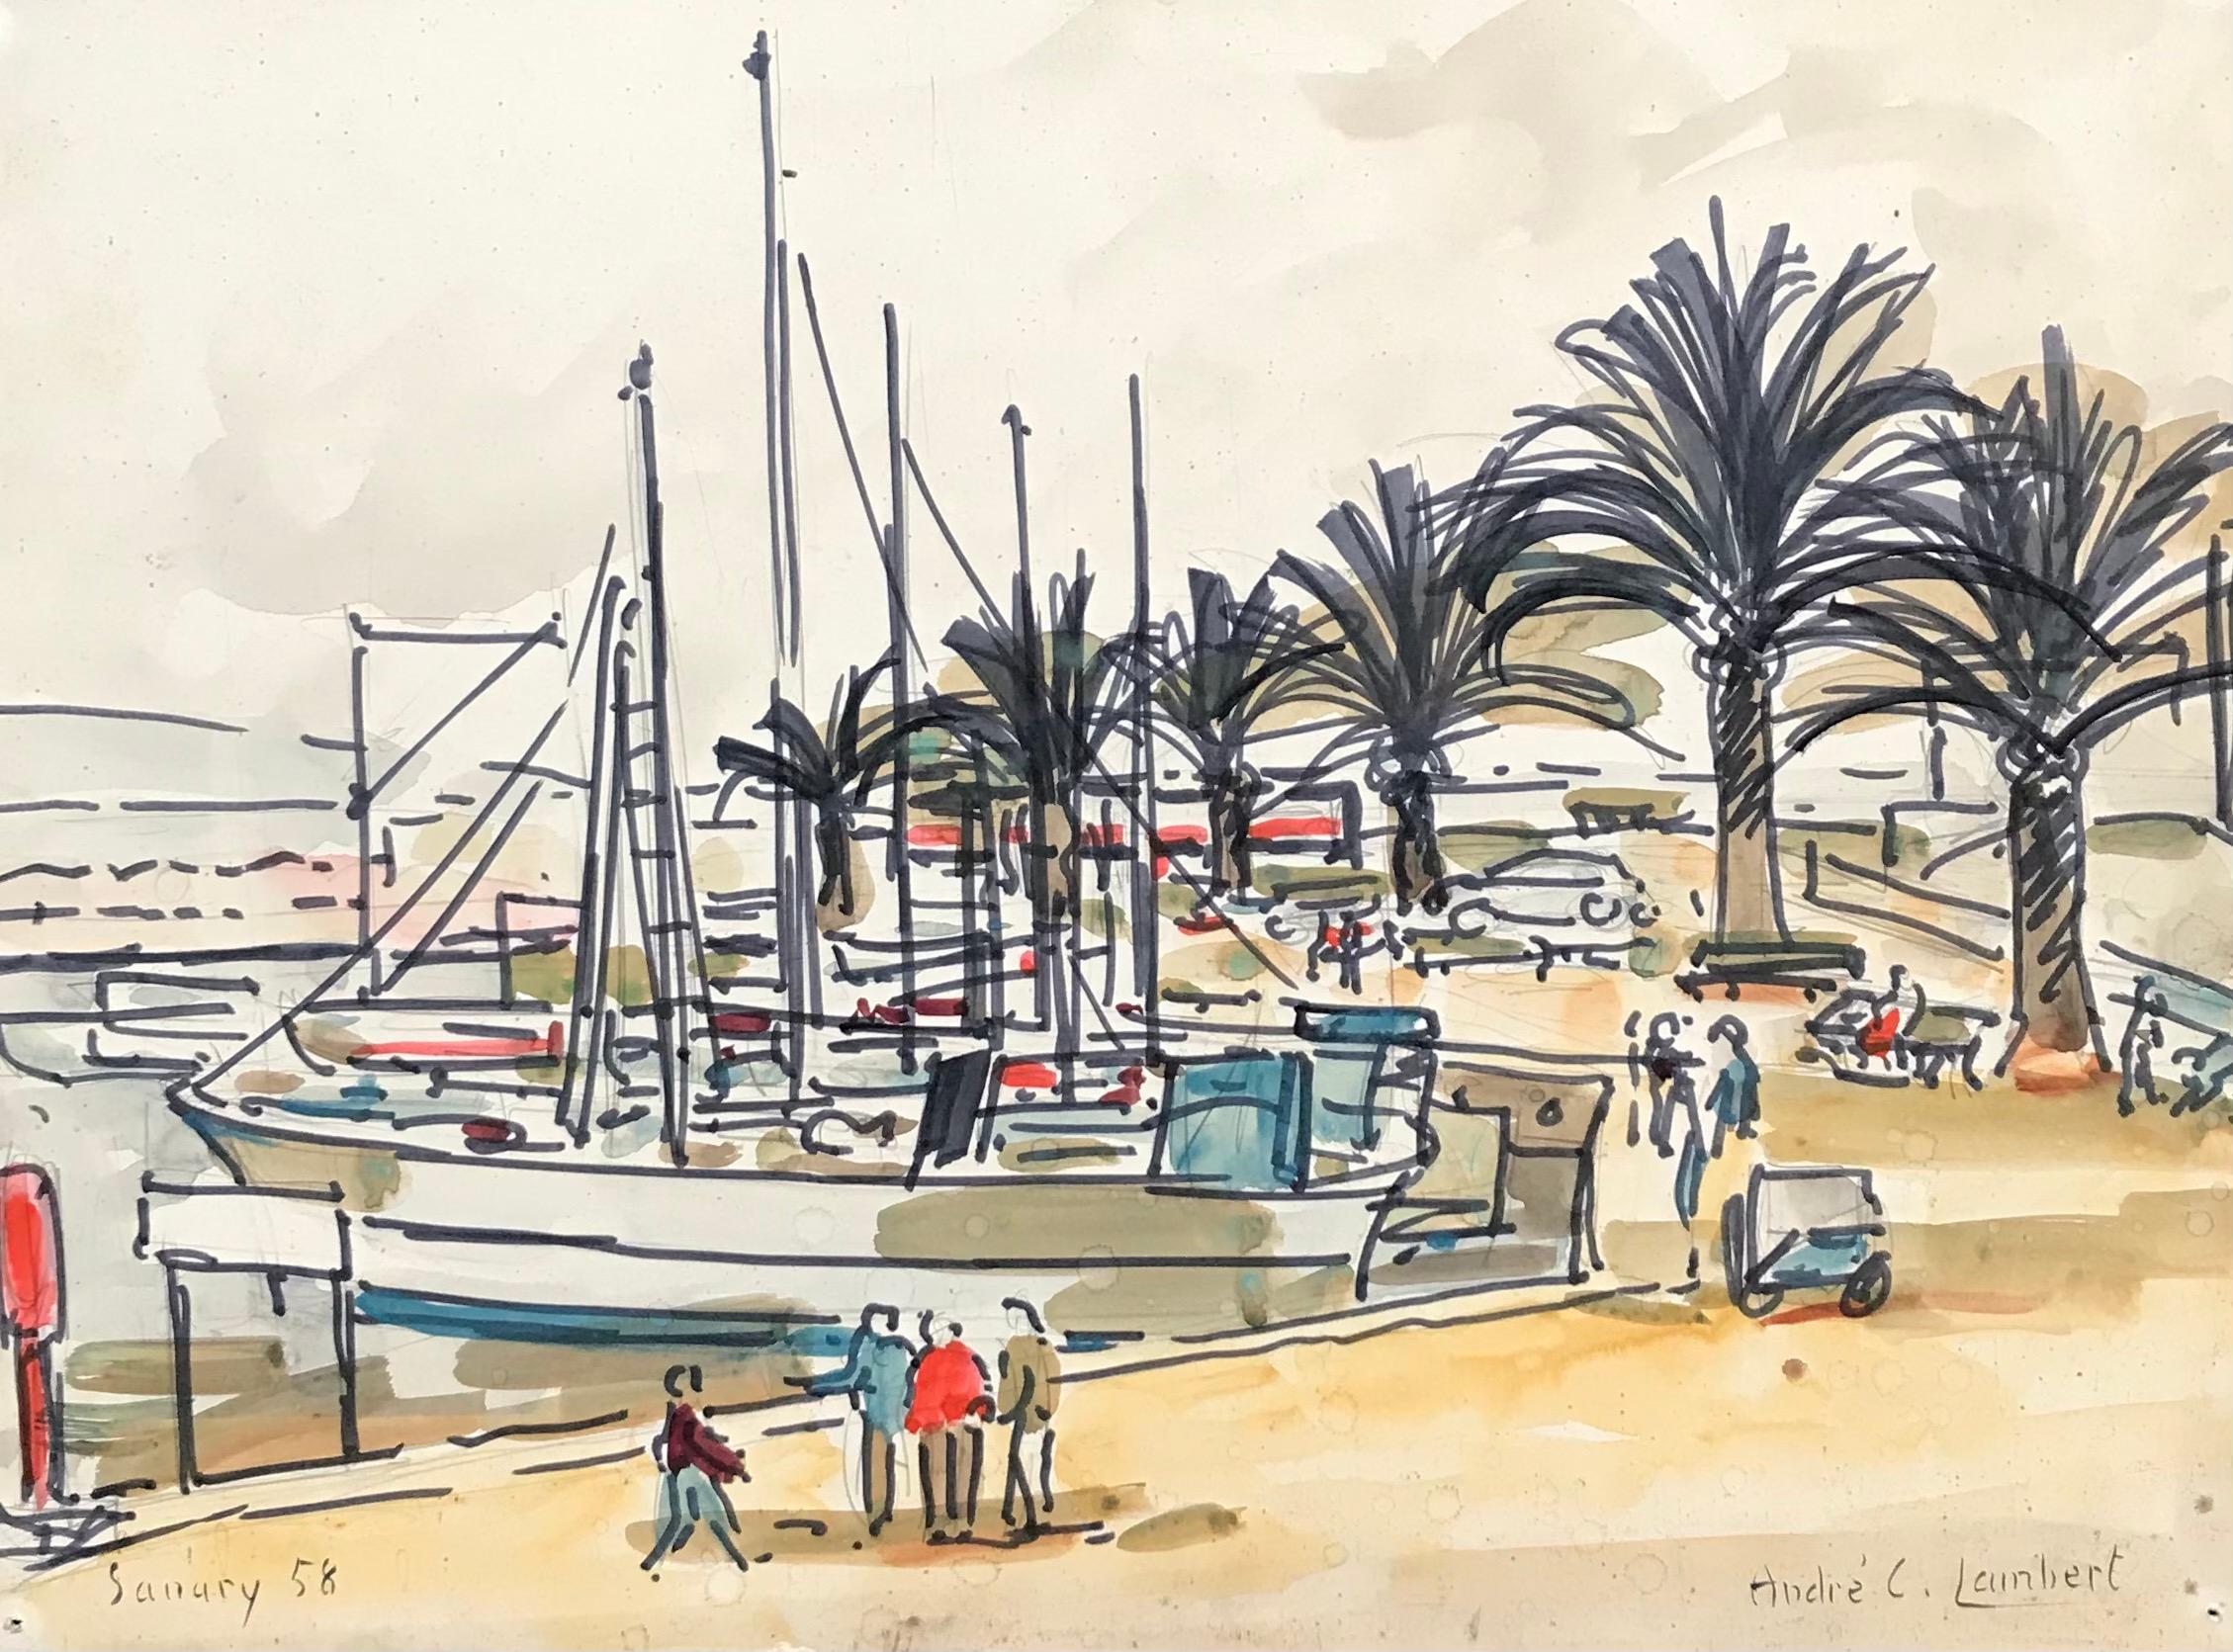 Sanary by André-Louis Lambert - Watercolor on paper 27x39 cm